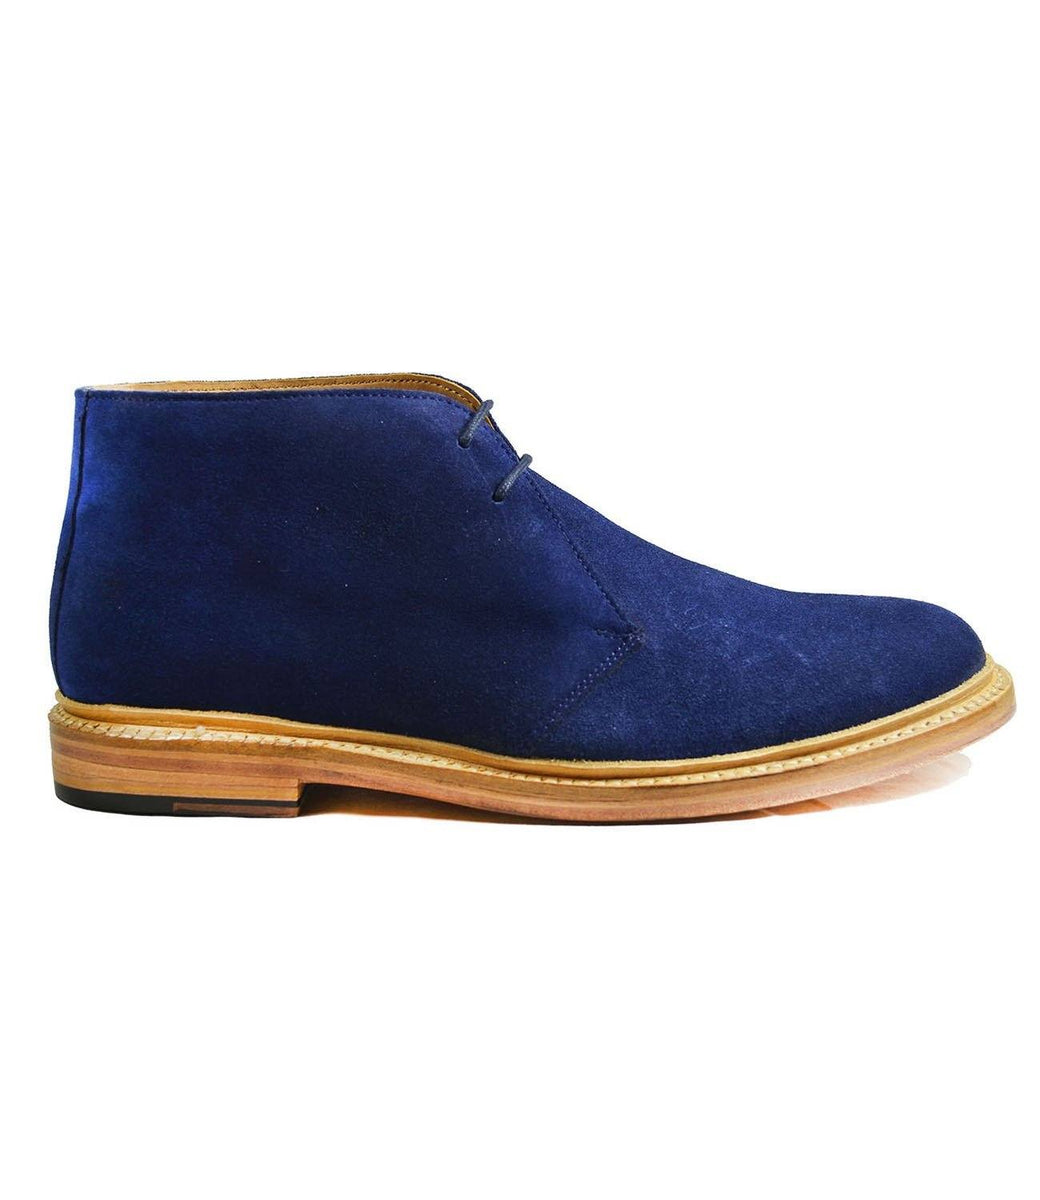 SAHARA Blue Suede Chukka Ankle Boots by Paul Malone | Paul Malone